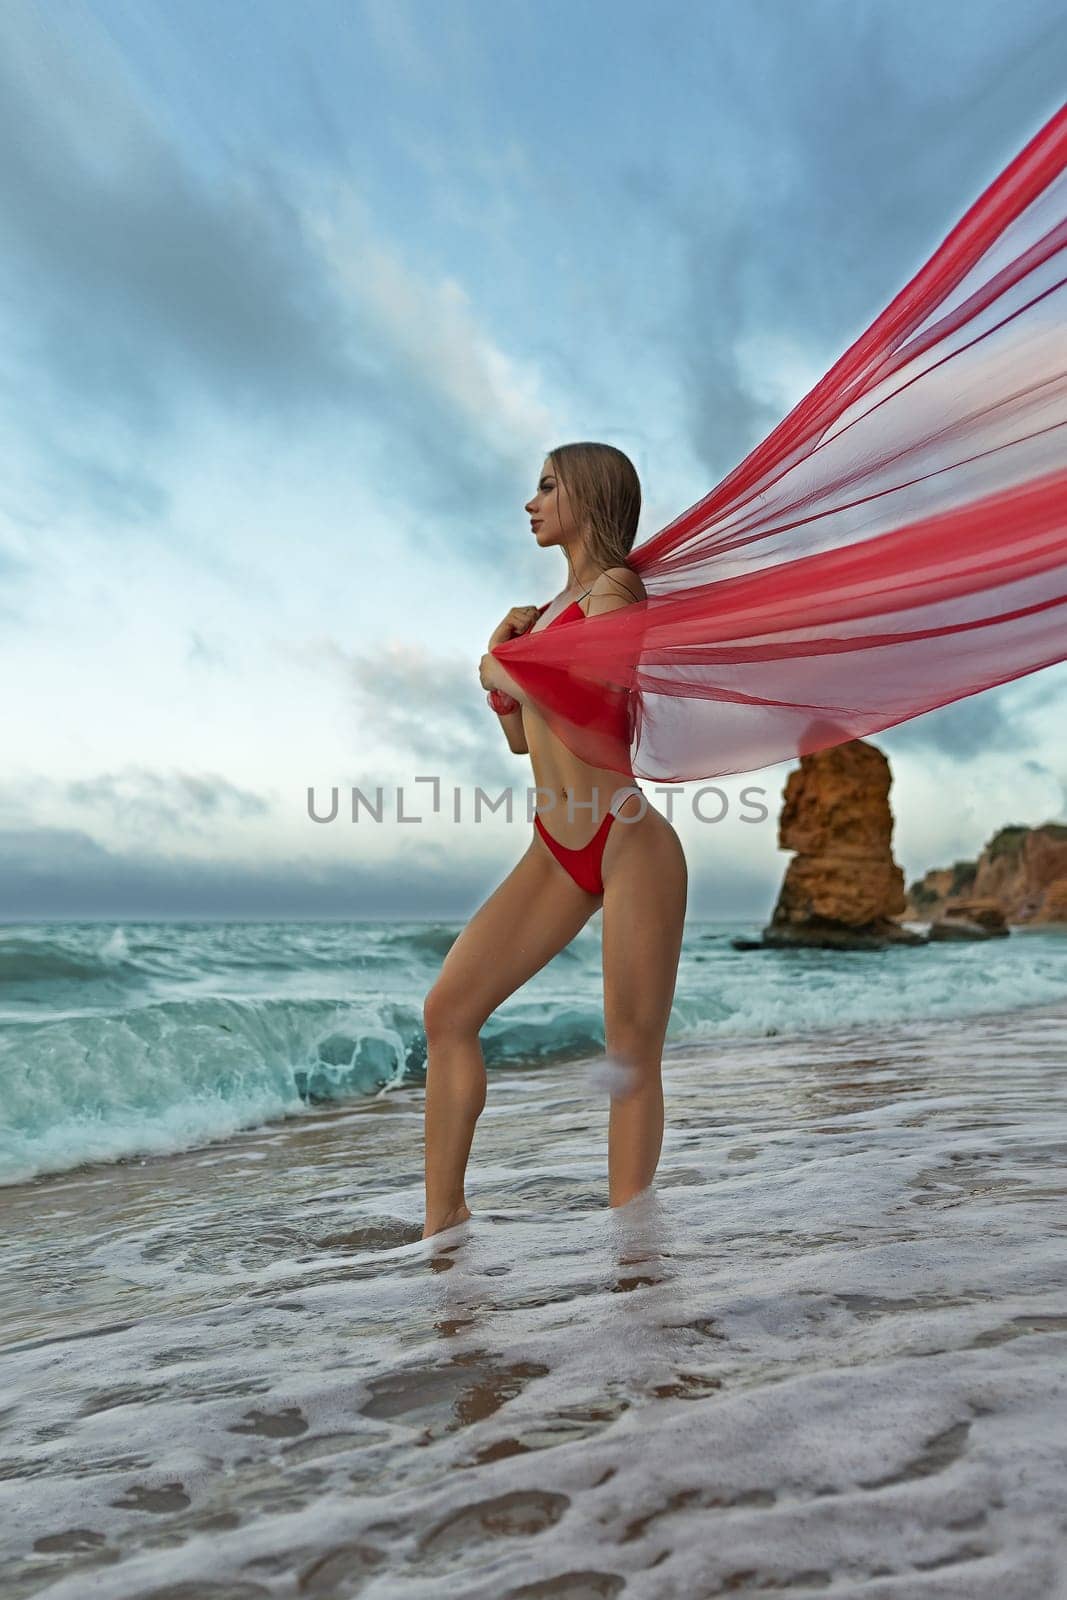 A sexy fitness model girl in a red swimsuit stands in the sea, wrapped in a transparent red cloth